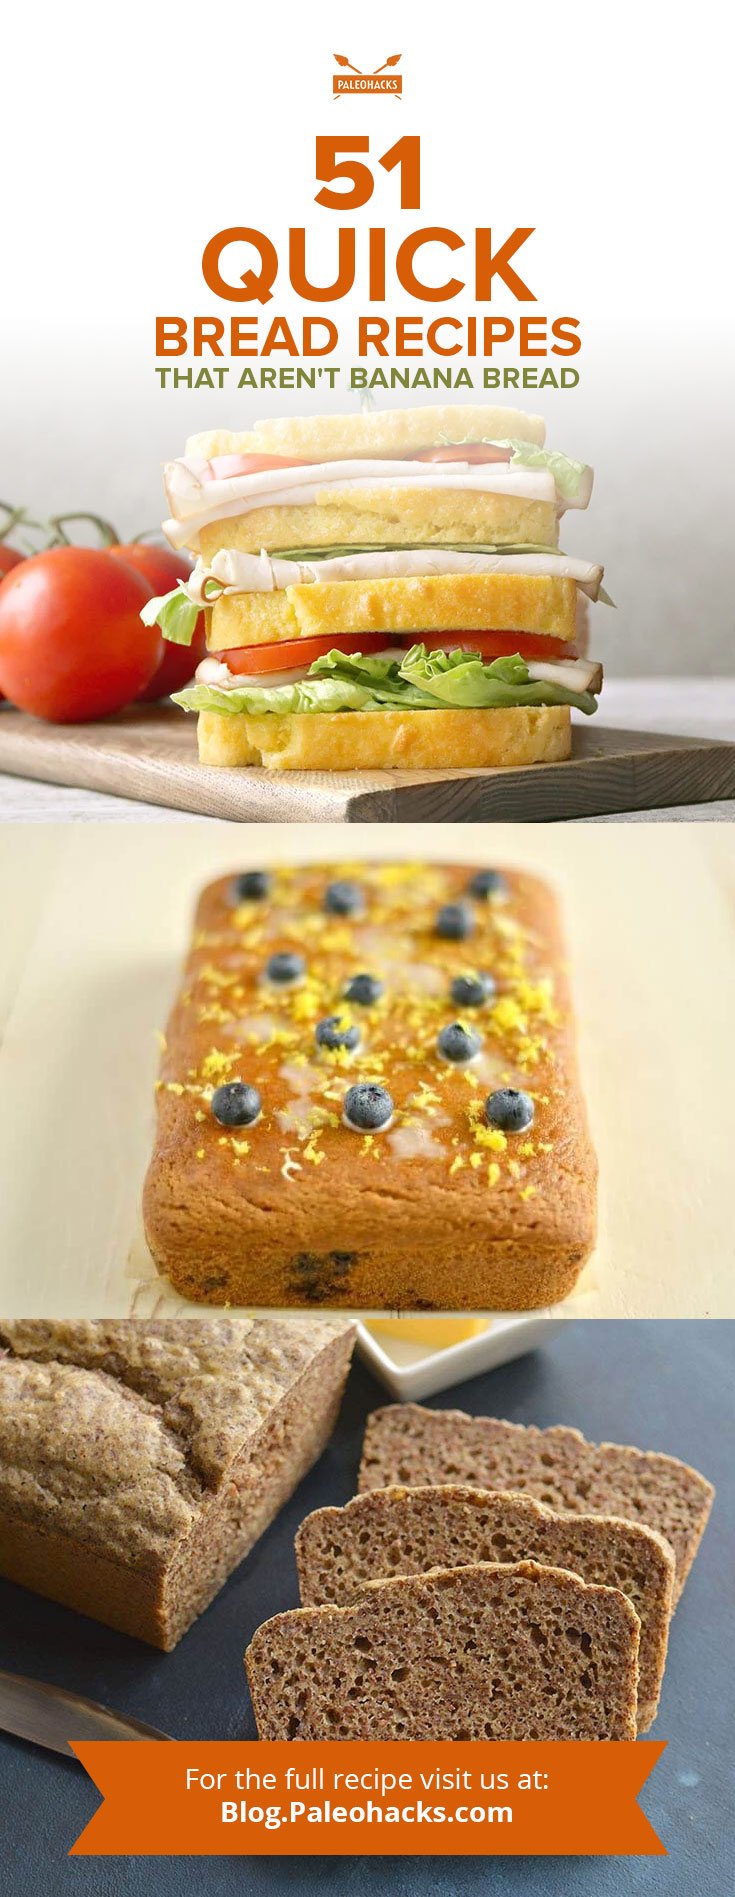 When you’re in the mood for bread, but need to ditch the grains, choose from one of these quick Paleo bread recipes. So, what are you waiting for? Get baking!